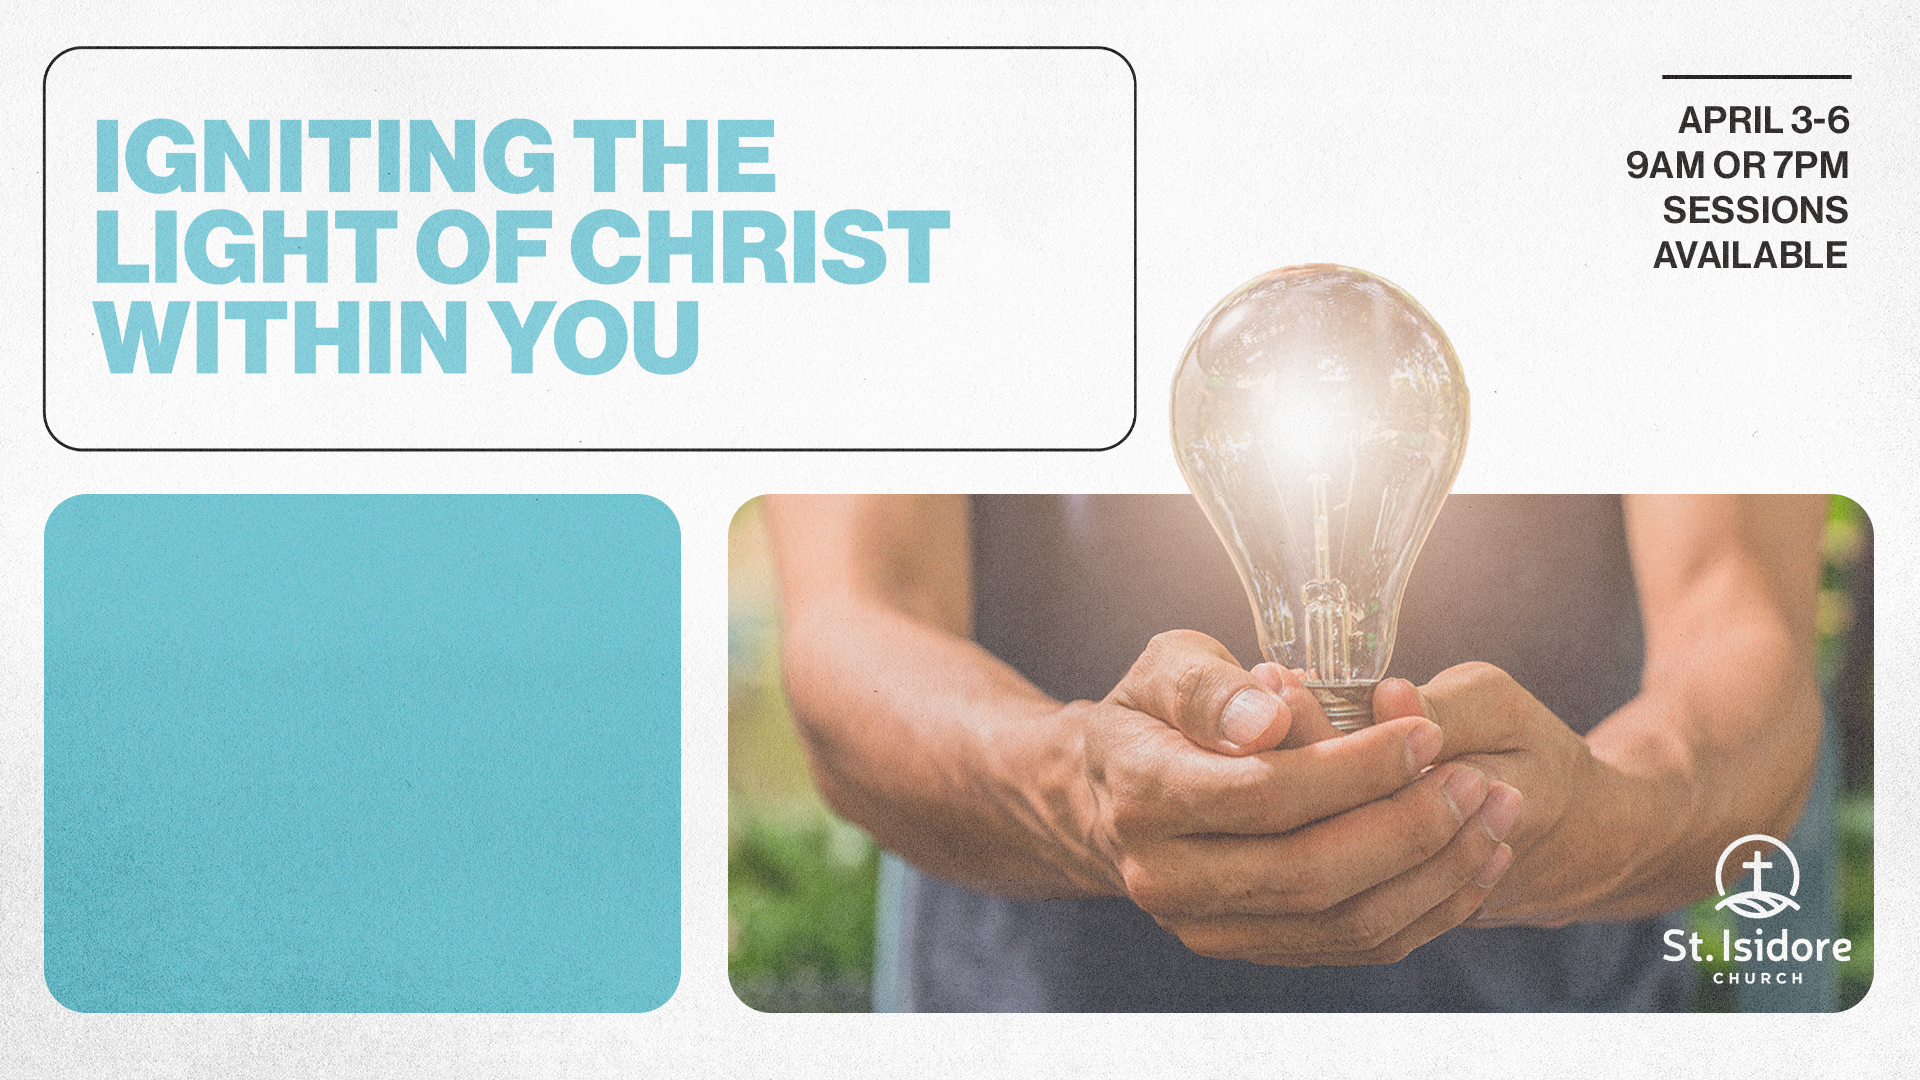 Igniting the Light of Christ within You